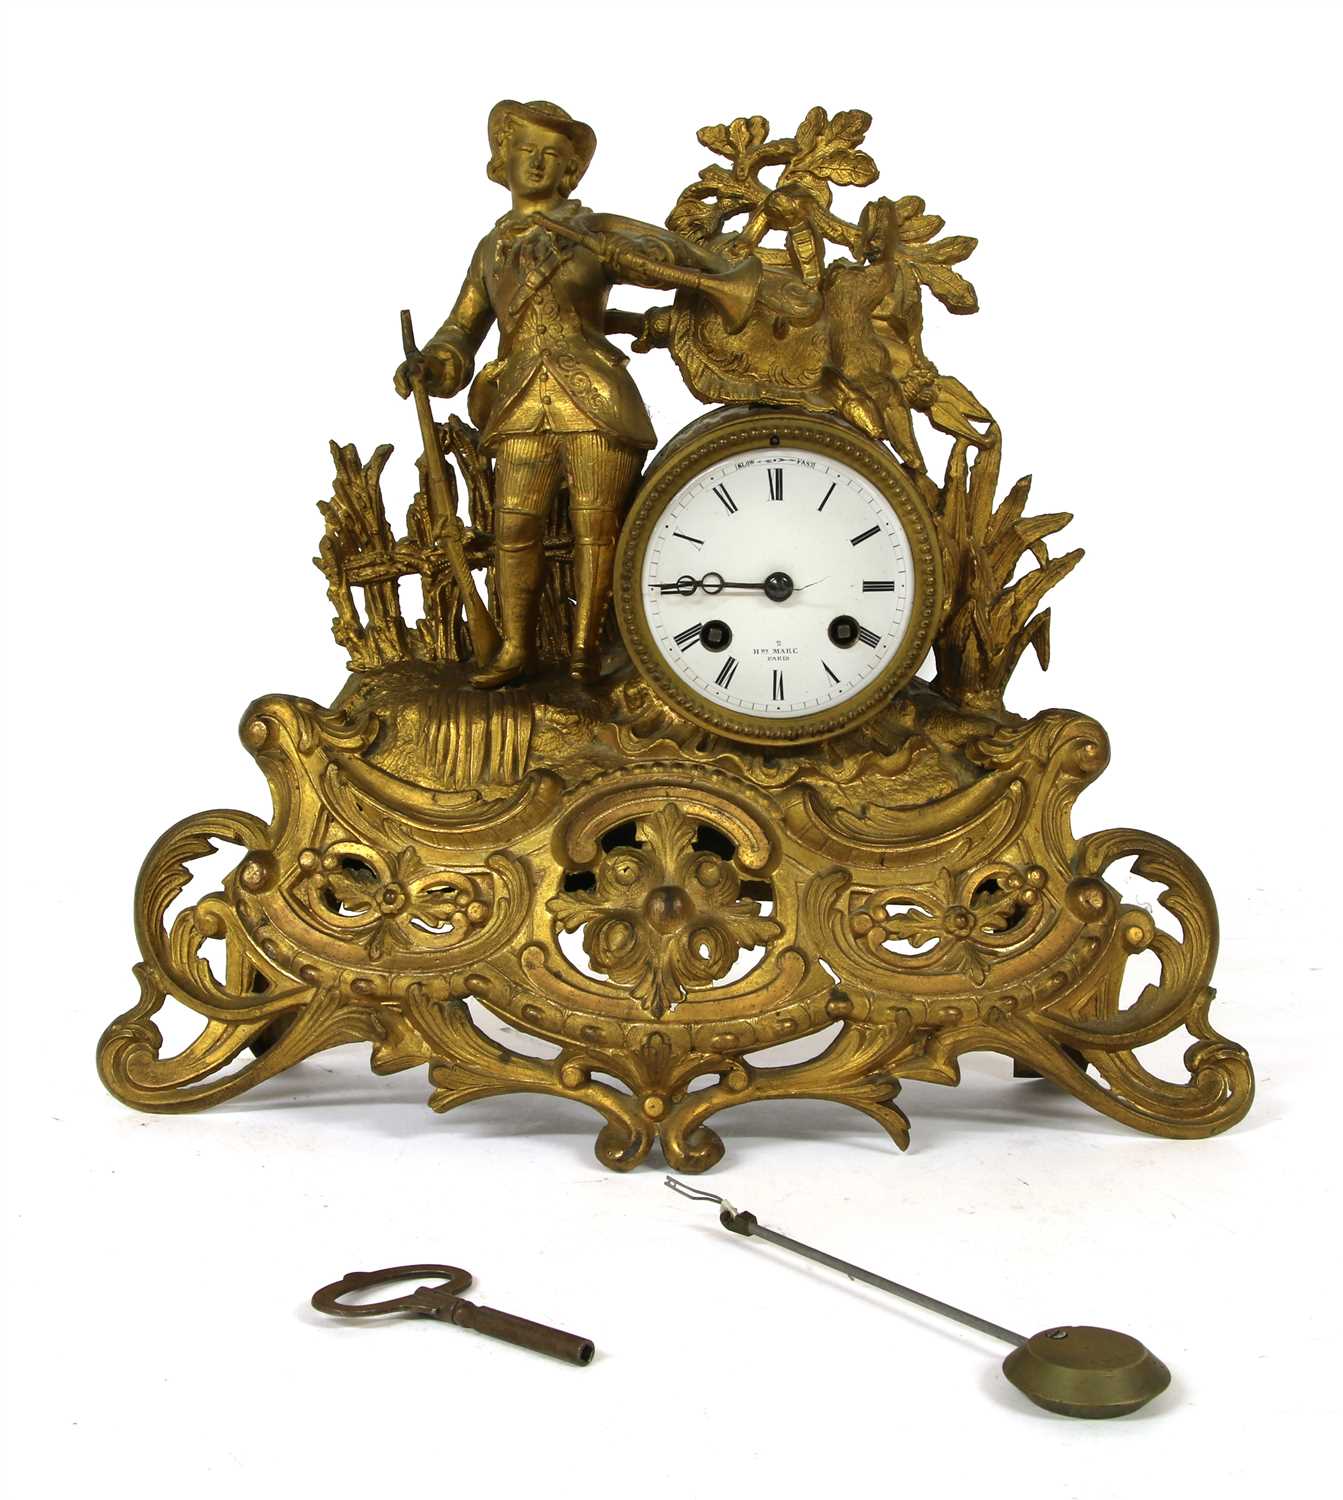 Lot 235 - A 19th century French spelter mantel clock